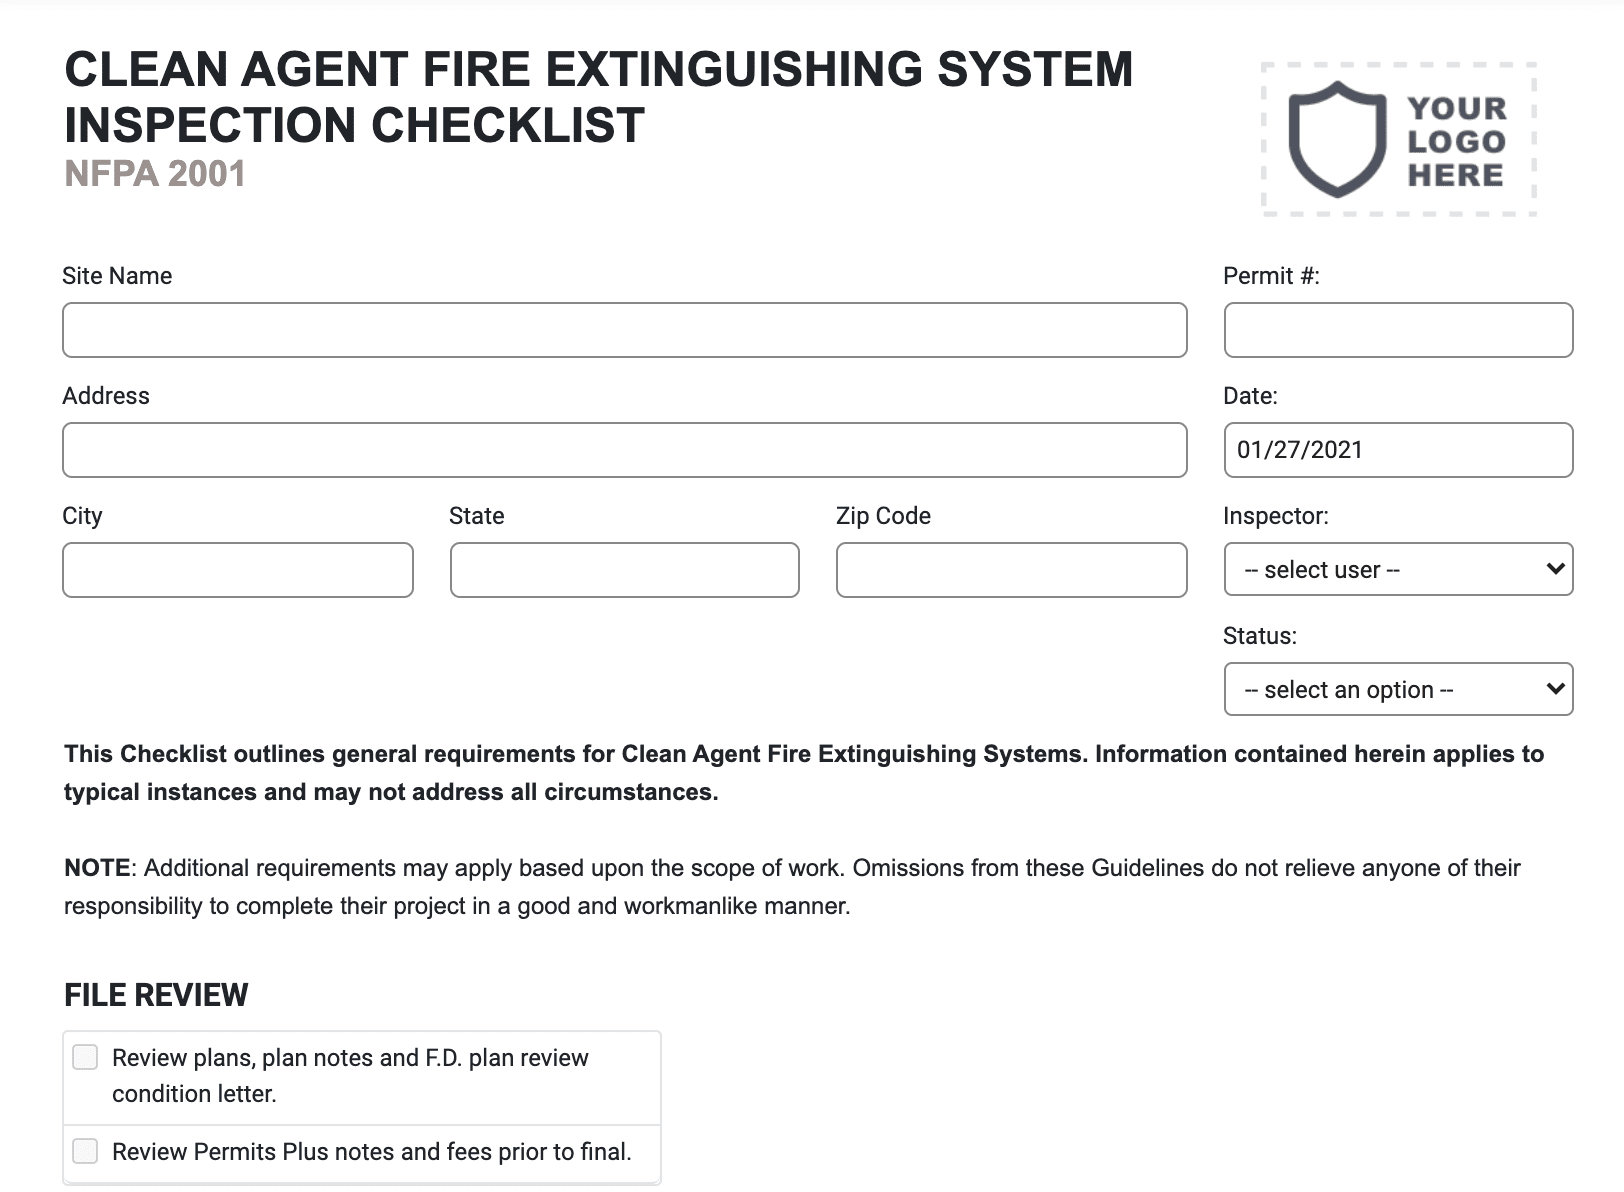 Clean Agent Fire Extinguishing System Inspection Checklist